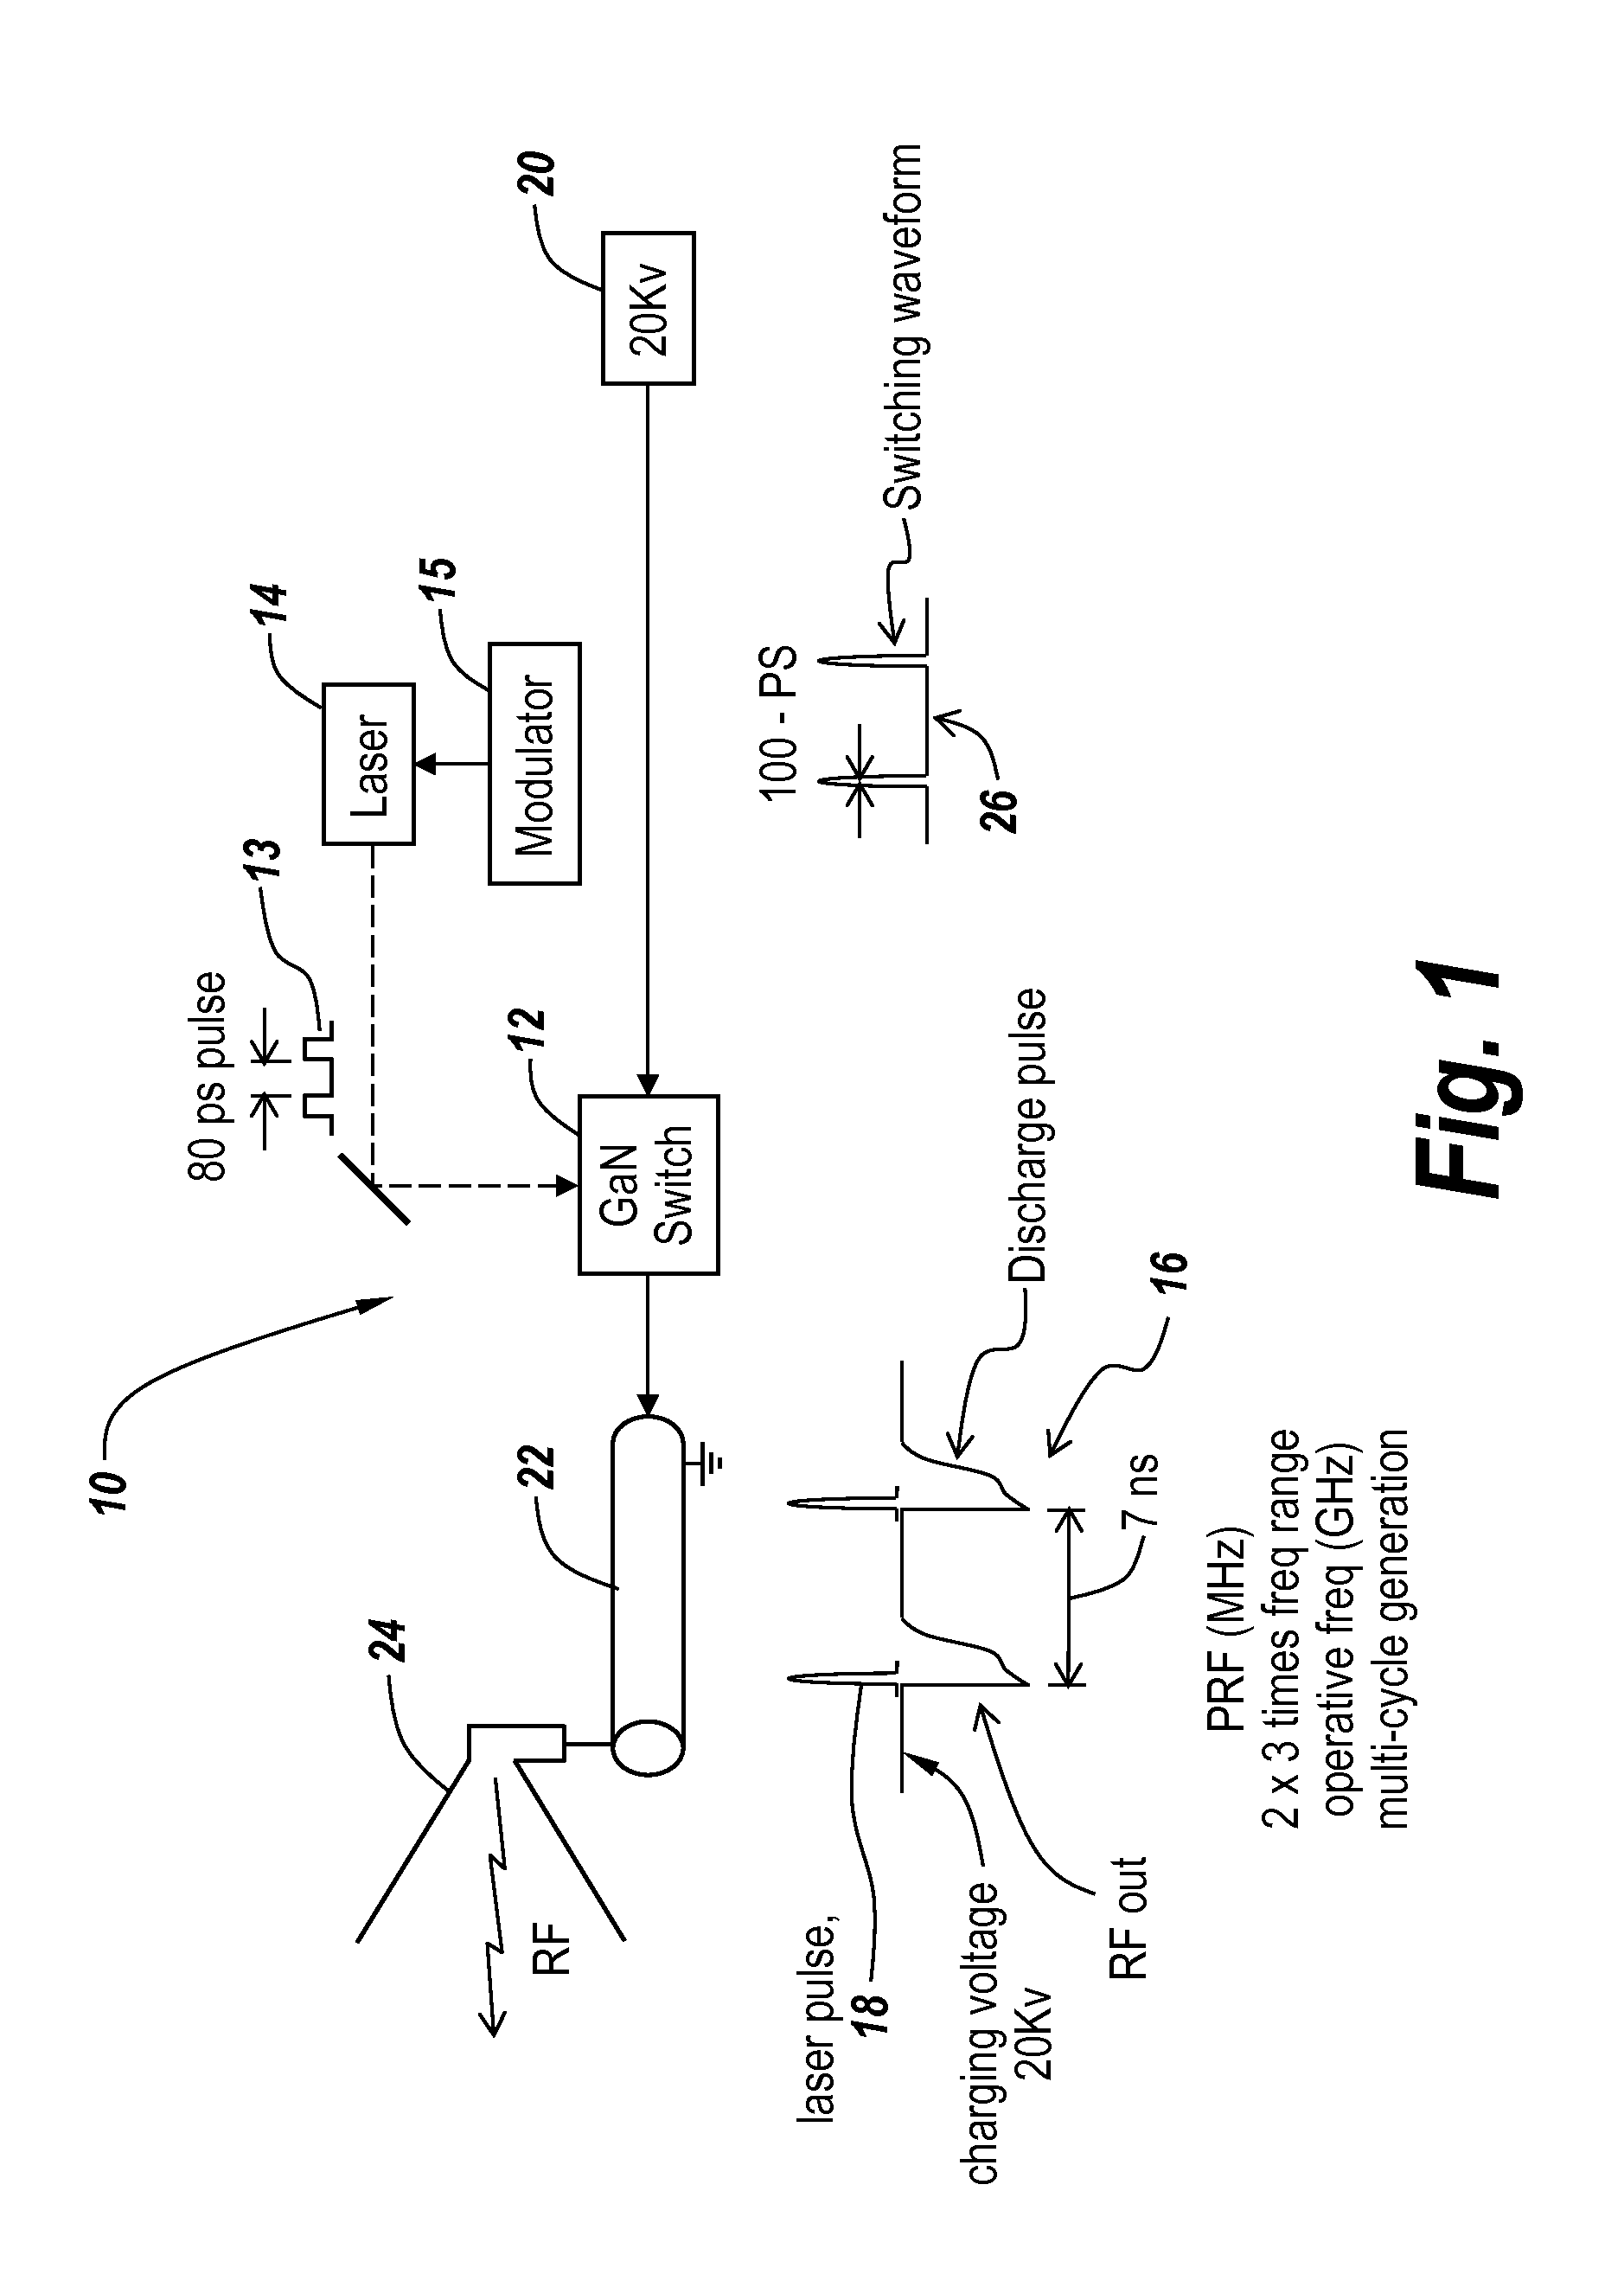 Generation of Flexible High Power Pulsed Waveforms